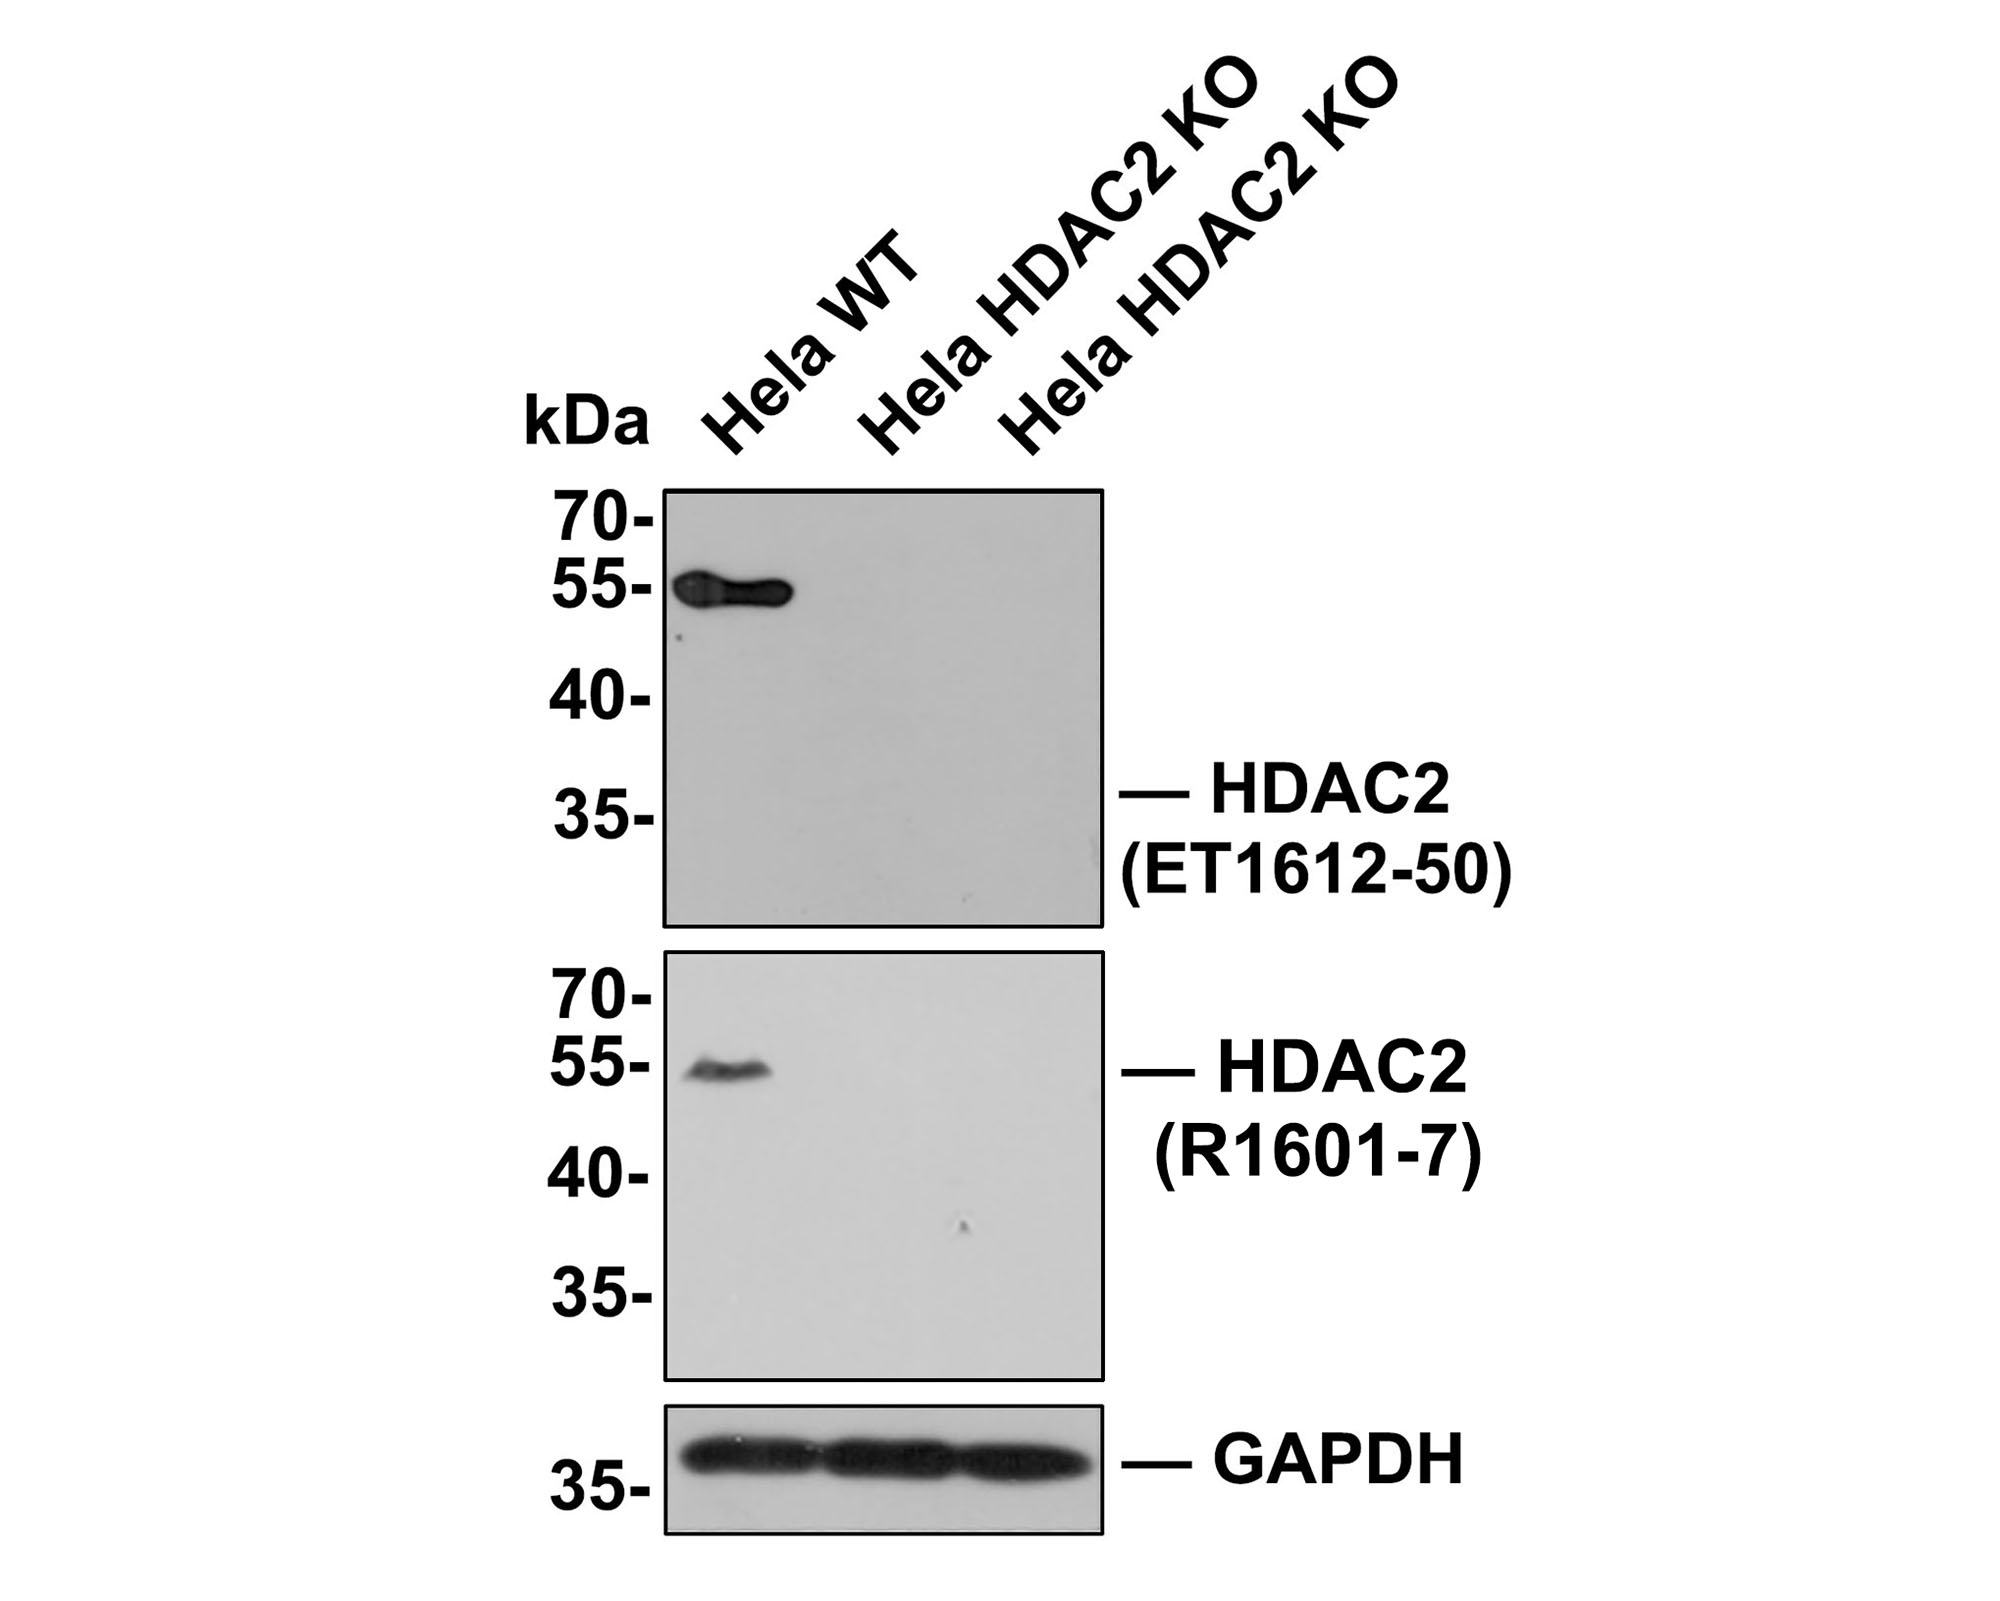 All lanes: Western blot analysis of HDAC2 with anti-HDAC2 antibody (ET1612-50) at 1:500 dilution.<br />
Lane 1: Wild-type Hela whole cell lysate (10 µg).<br />
Lane 2/3: HDAC2 knockout Hela whole cell lysate (10 µg).<br />
<br />
ET1612-50 was shown to specifically react with HDAC2 in wild-type Hela cells. No bands were observed when HDAC2 knockout sample were tested. Wild-type and HDAC2 knockout samples were subjected to SDS-PAGE. Proteins were transferred to a PVDF membrane and blocked with 5% NFDM in TBST for 1 hour at room temperature. The primary antibody (ET1612-50, 1:500) was used in 5% BSA at room temperature for 2 hours. Goat Anti-Rabbit IgG-HRP Secondary Antibody (HA1001) at 1:300,000 dilution was used for 1 hour at room temperature.